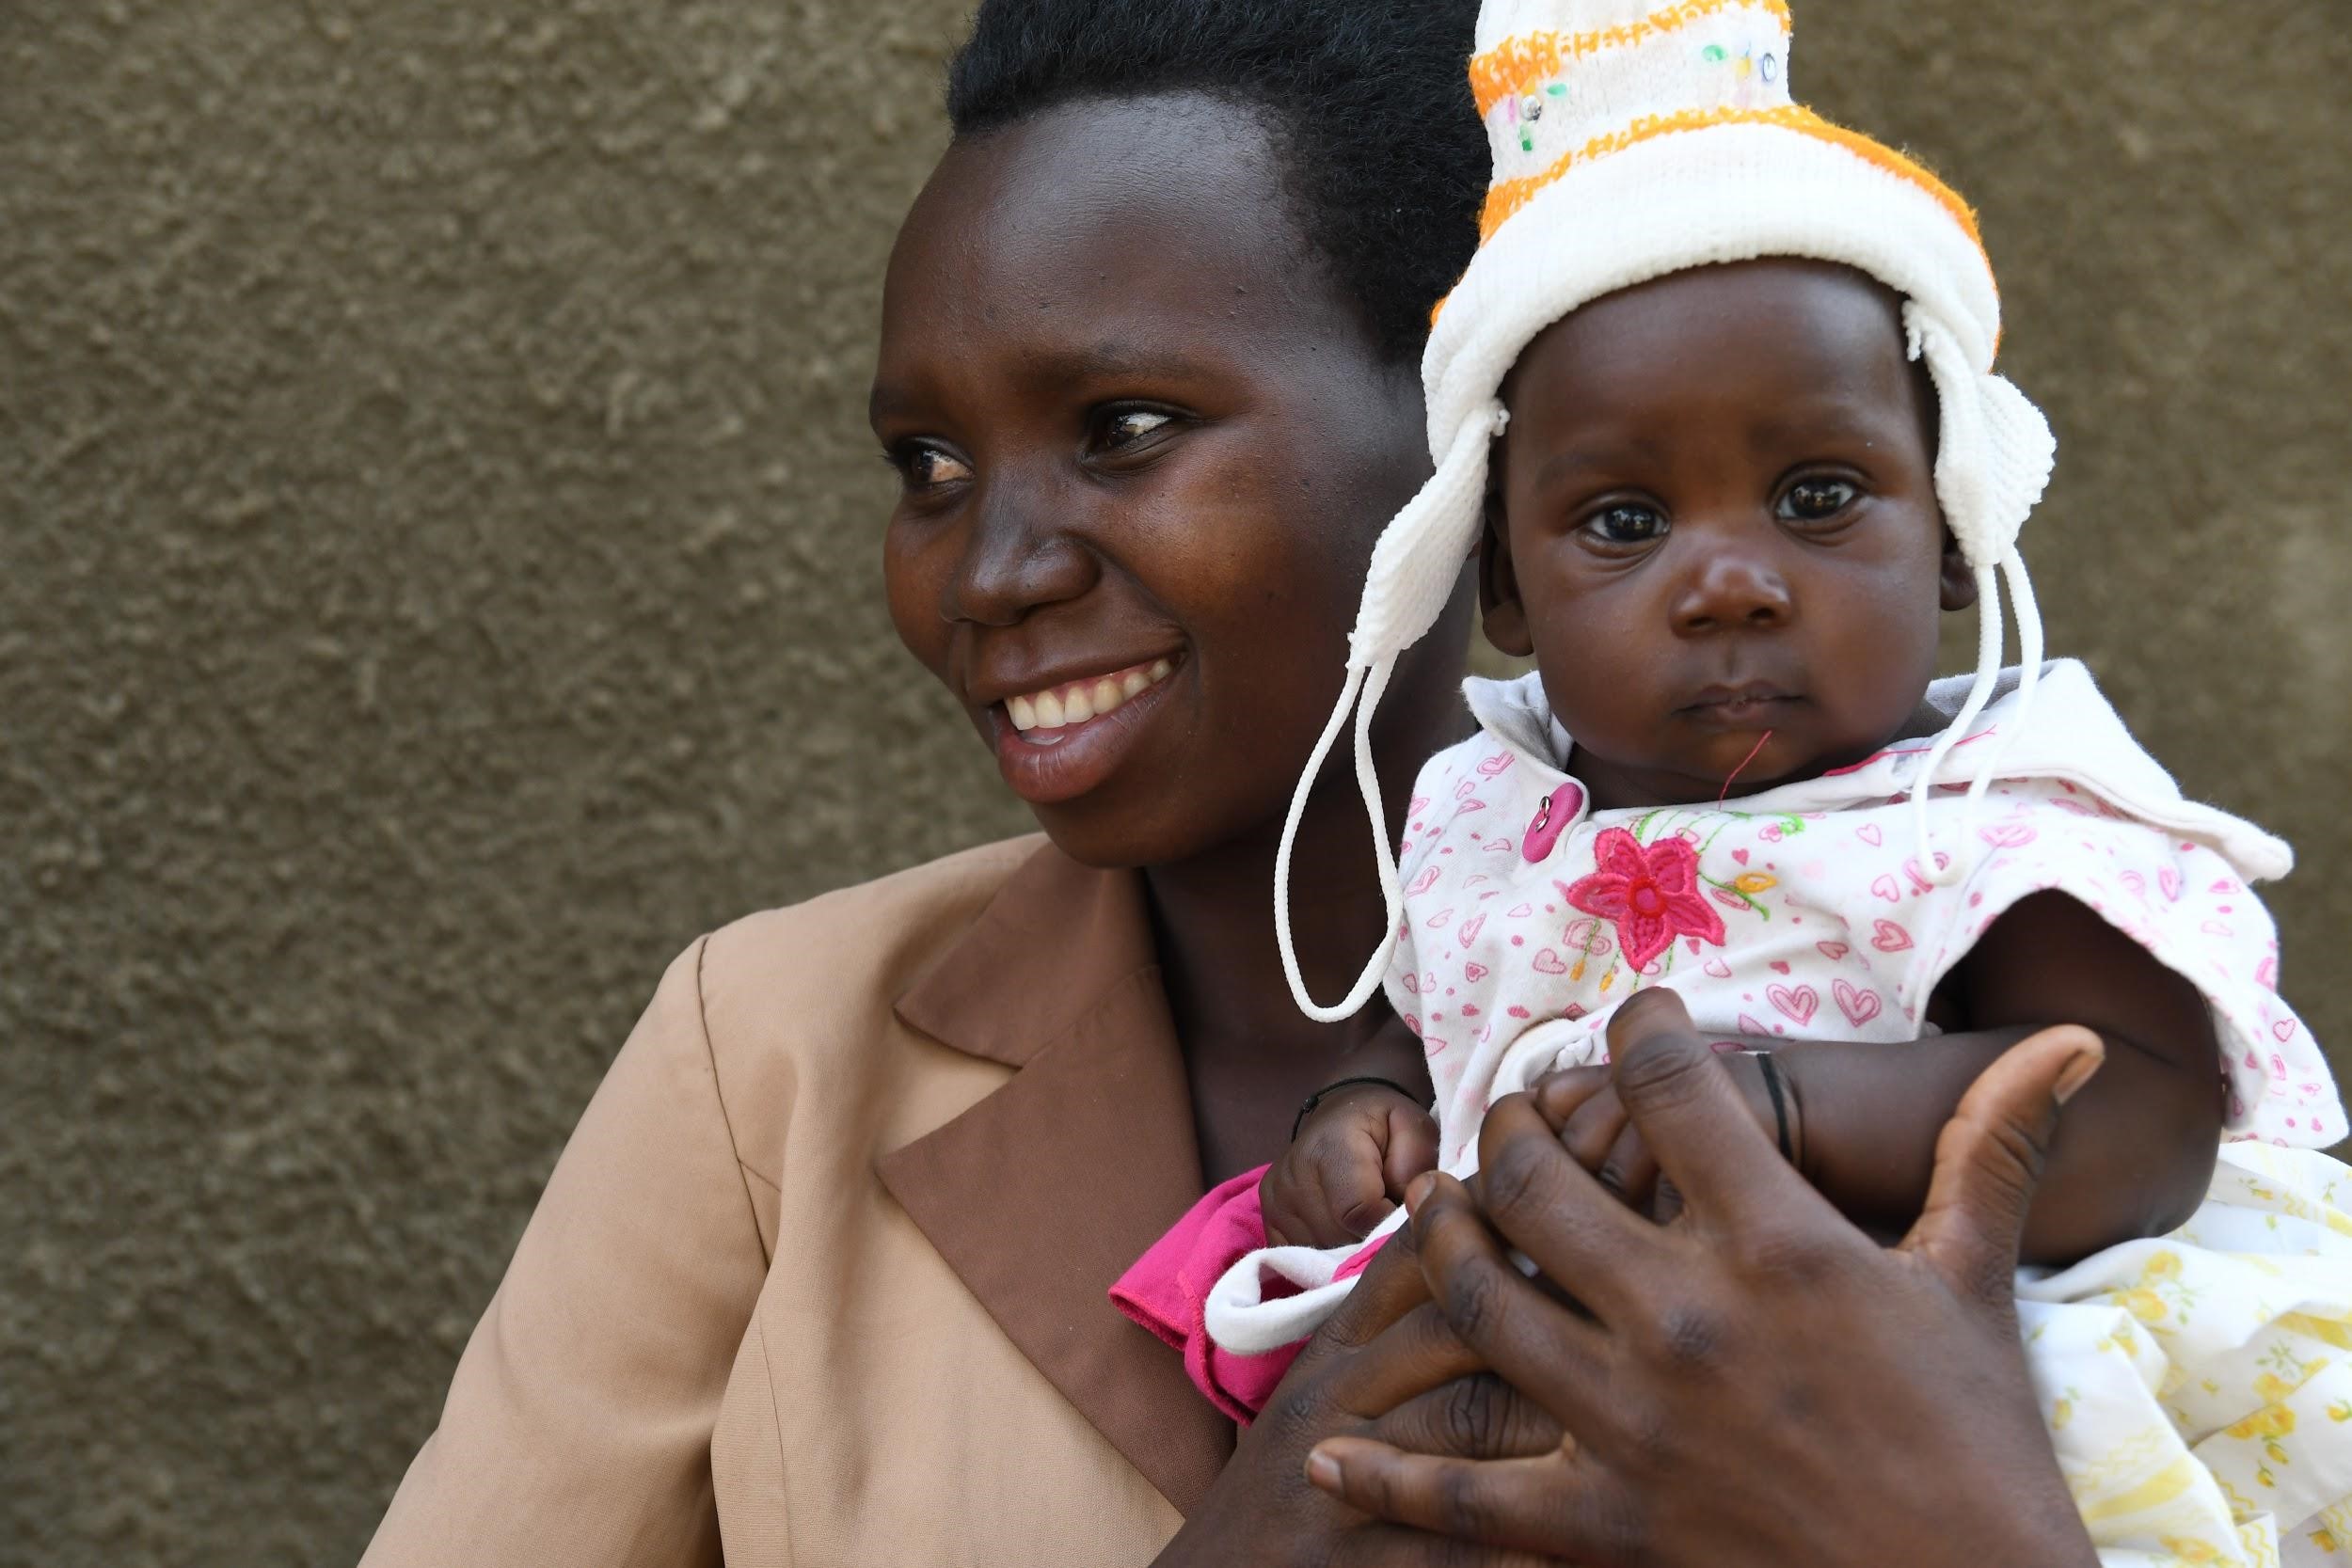 A woman holds her child while smiling.